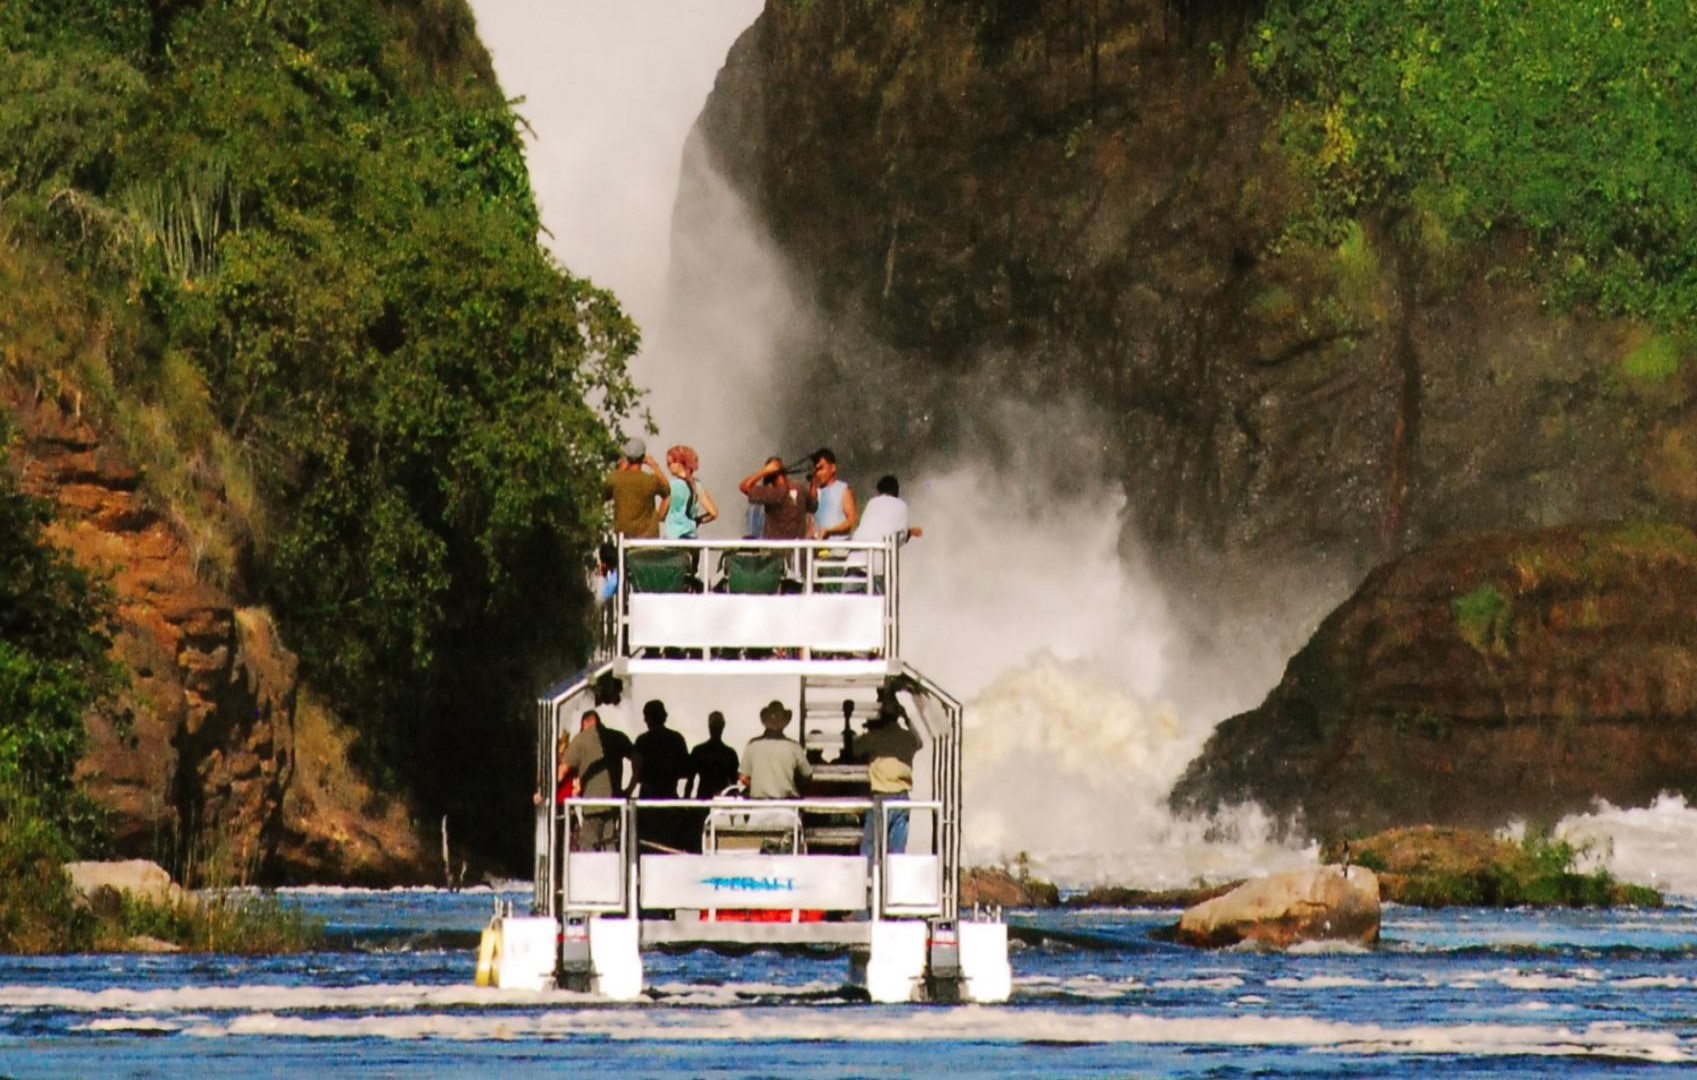 Guests On A Boat Cruise To Murchison Falls, In Murchison Falls National Park